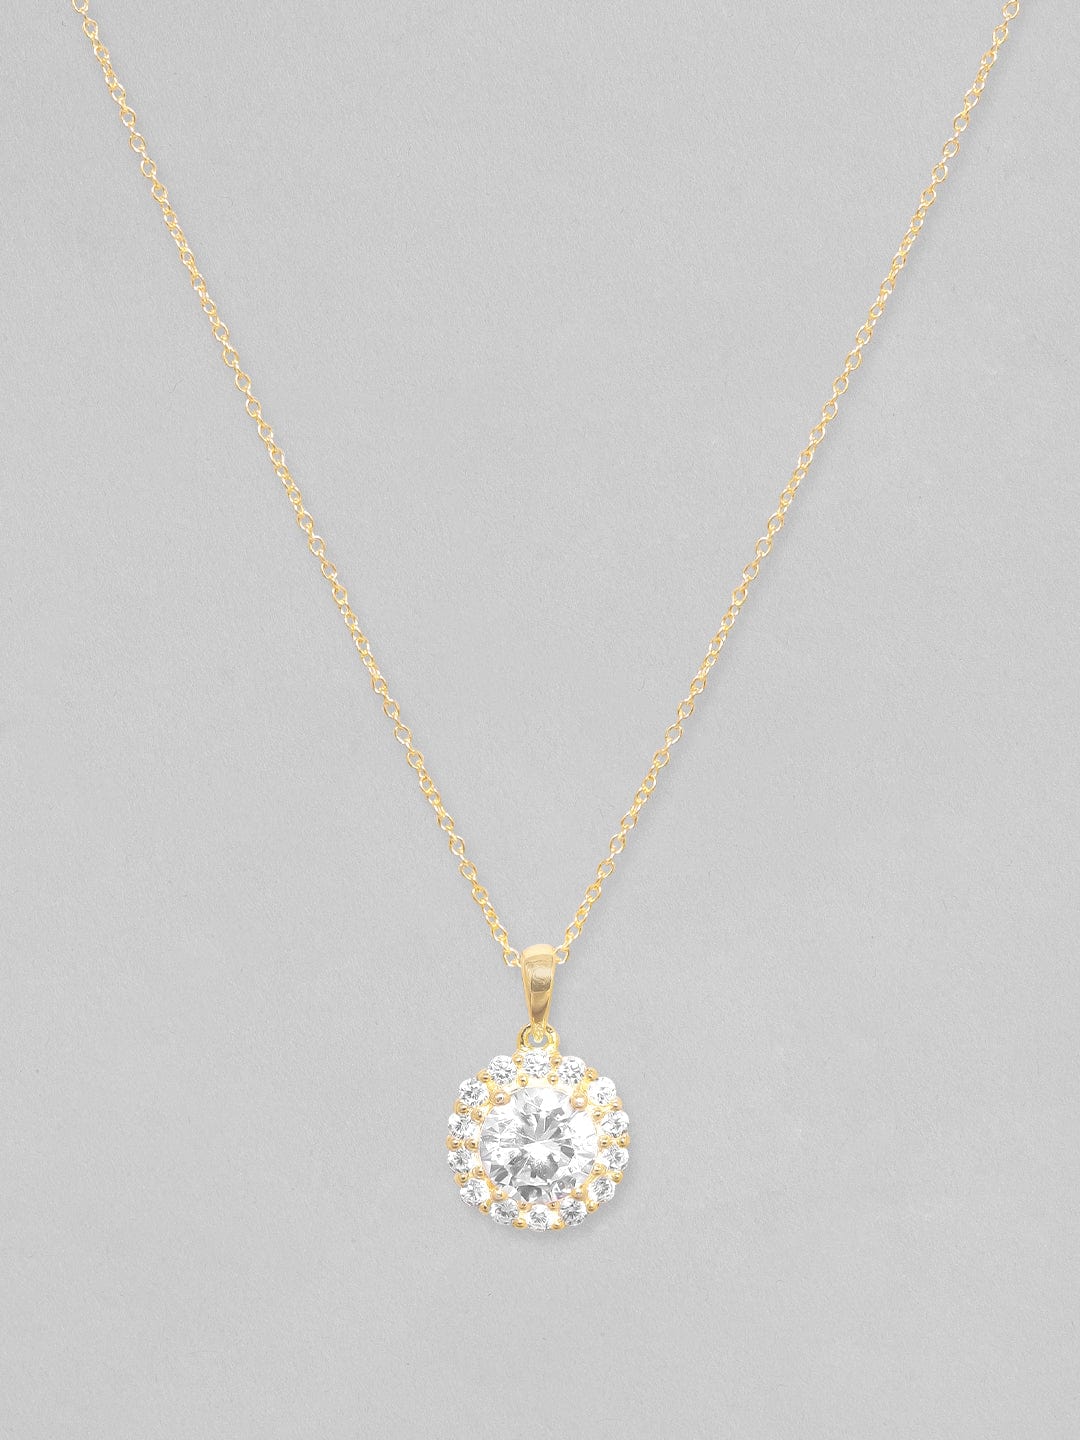 Rubans Silver Exquisite Gold Tone 925 Sterling Silver Necklace with AD Pendant Necklace